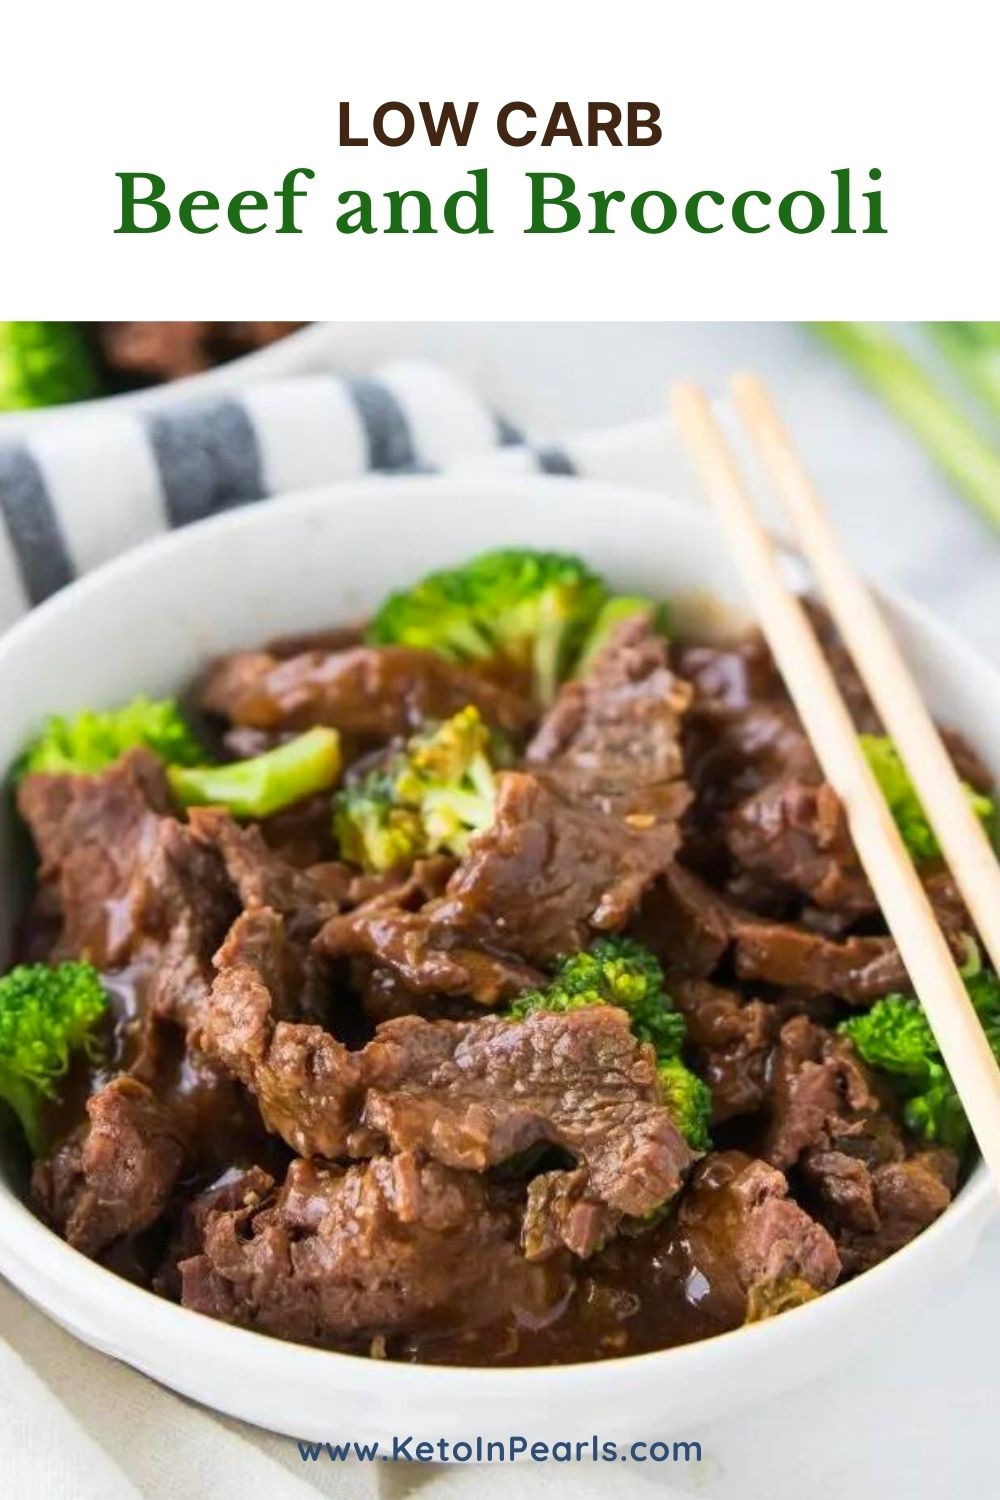 Take-Out Style Low Carb Beef and Broccoli | Keto In Pearls